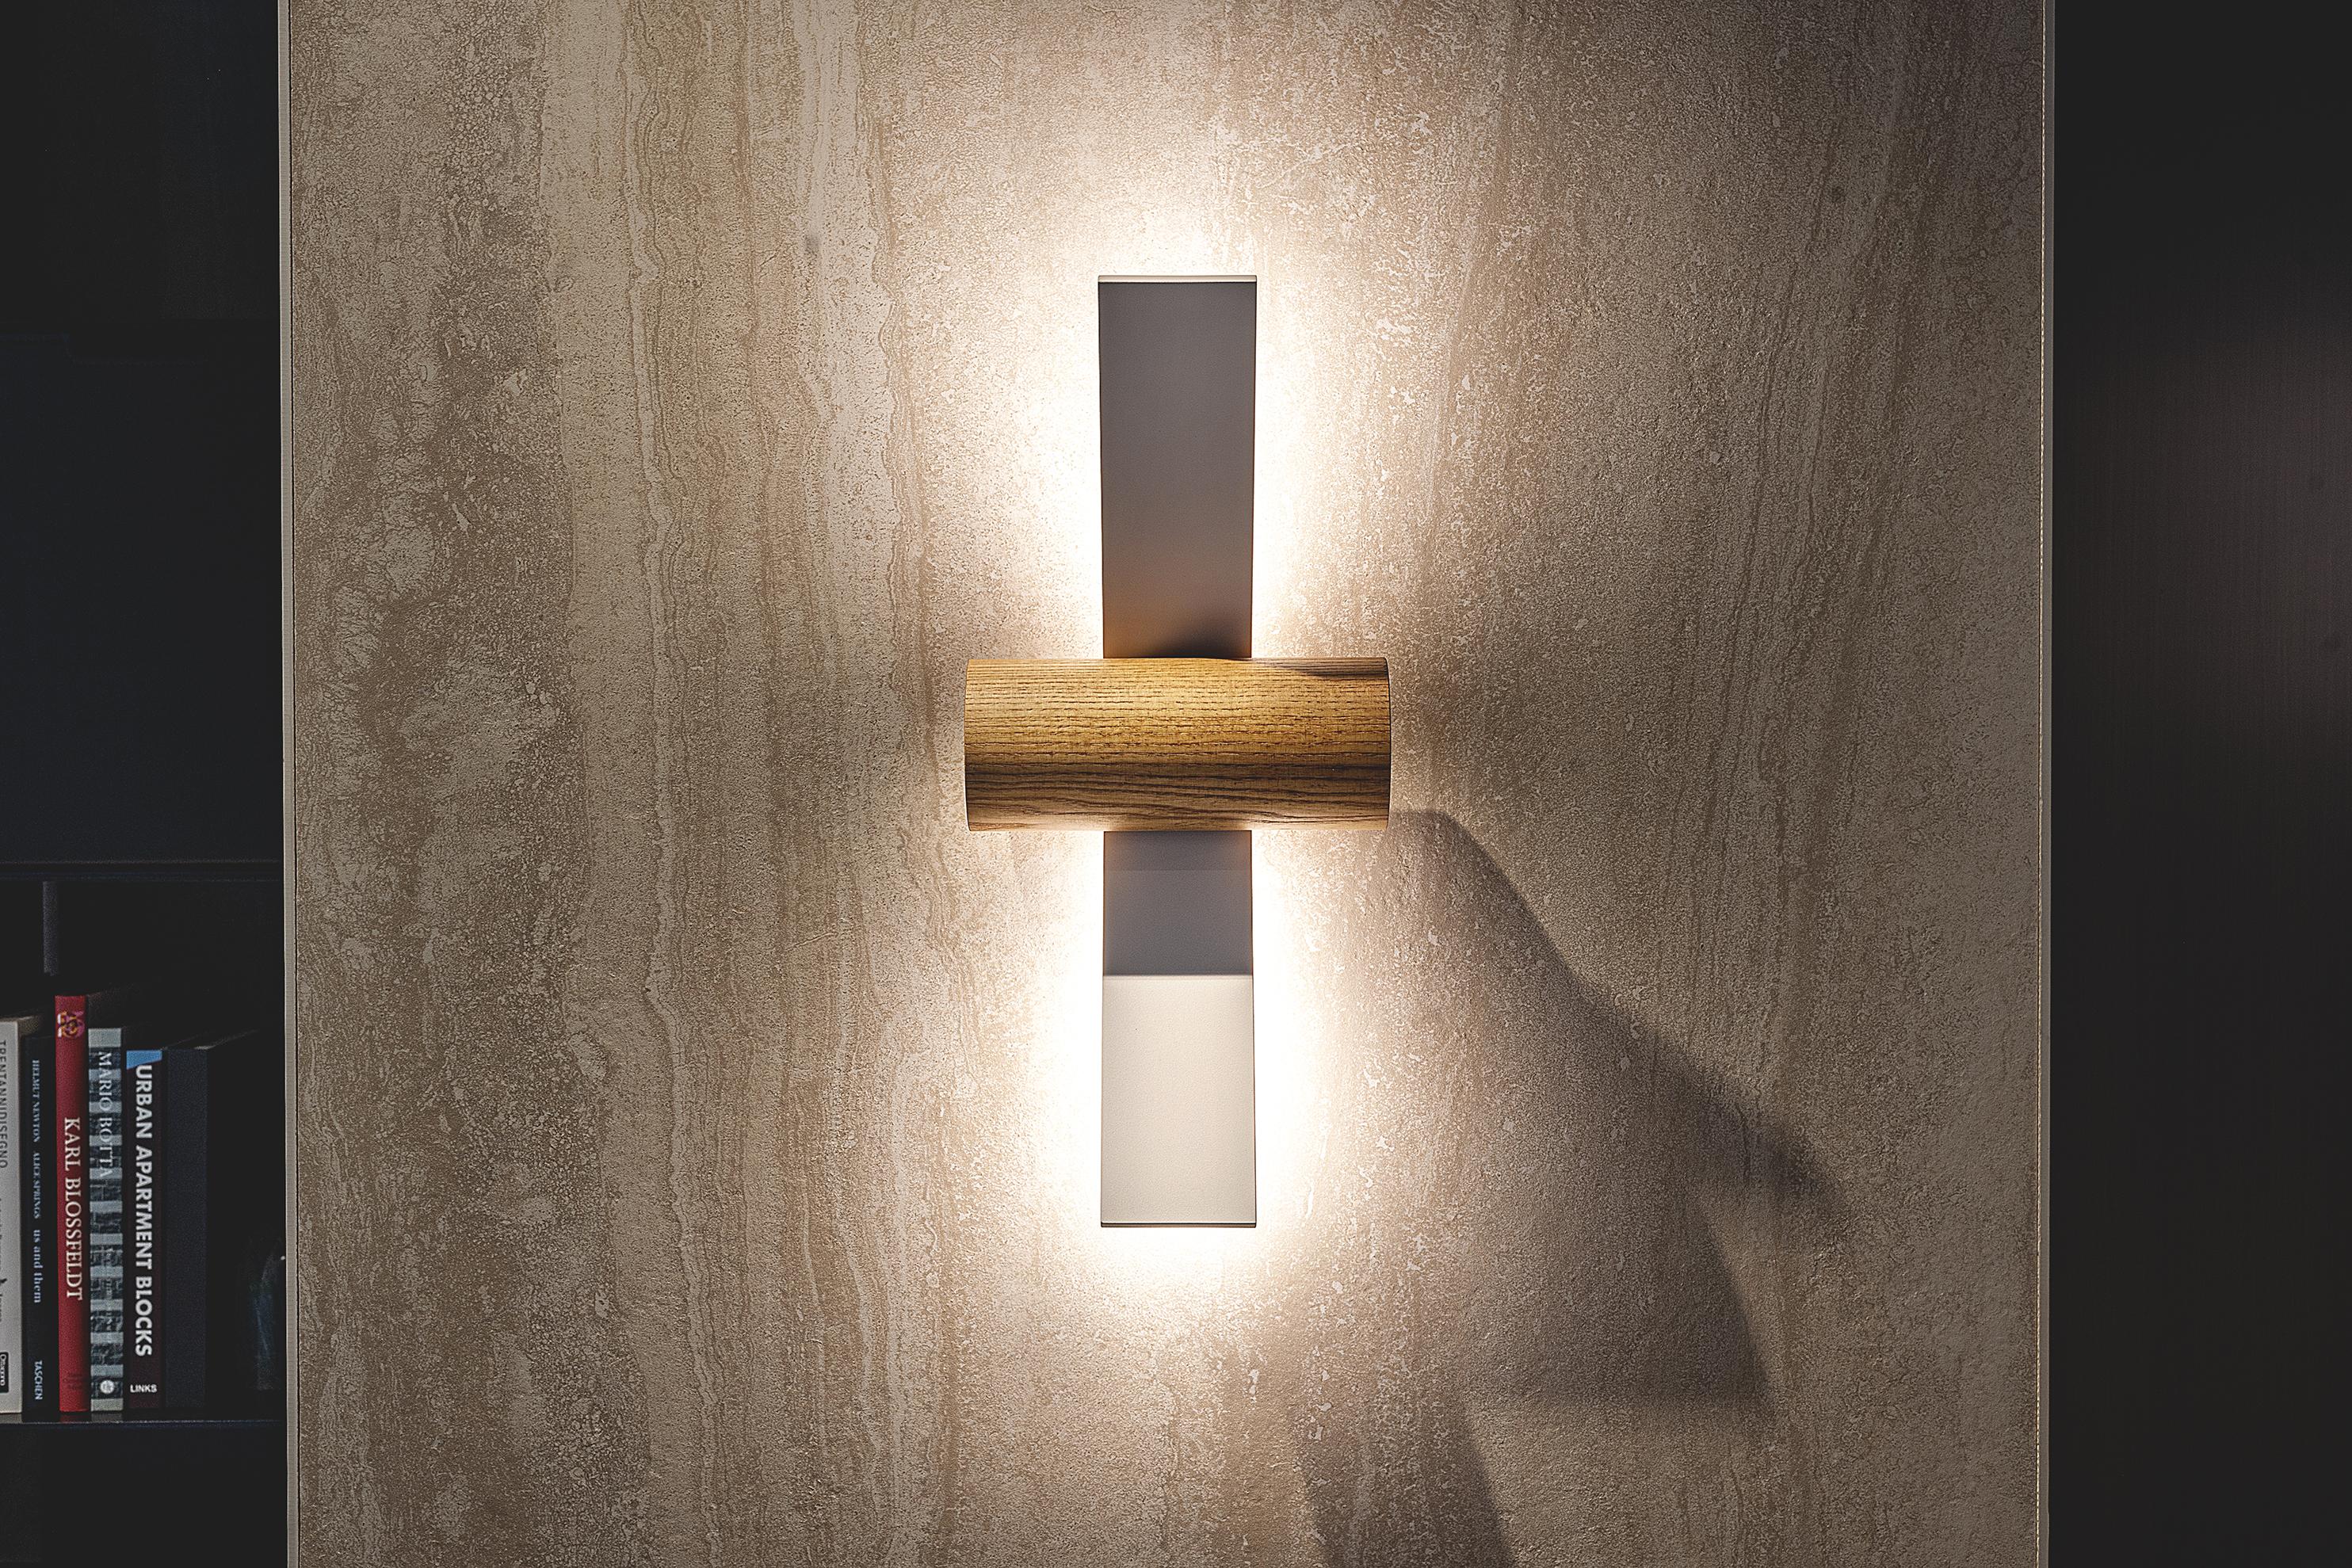 Wall Lamp Nastro 563.43 by TOOY
Designer: Studiopepe

Model shown: Beige hardware + Terracotta cylinder
Dimensions: H. 50 x W. 22 x D. 15 cm
Source light: 1 x LED 220/240V Compliant with US electric system

LED 17W 2700K

The Nastro wall lamps sees